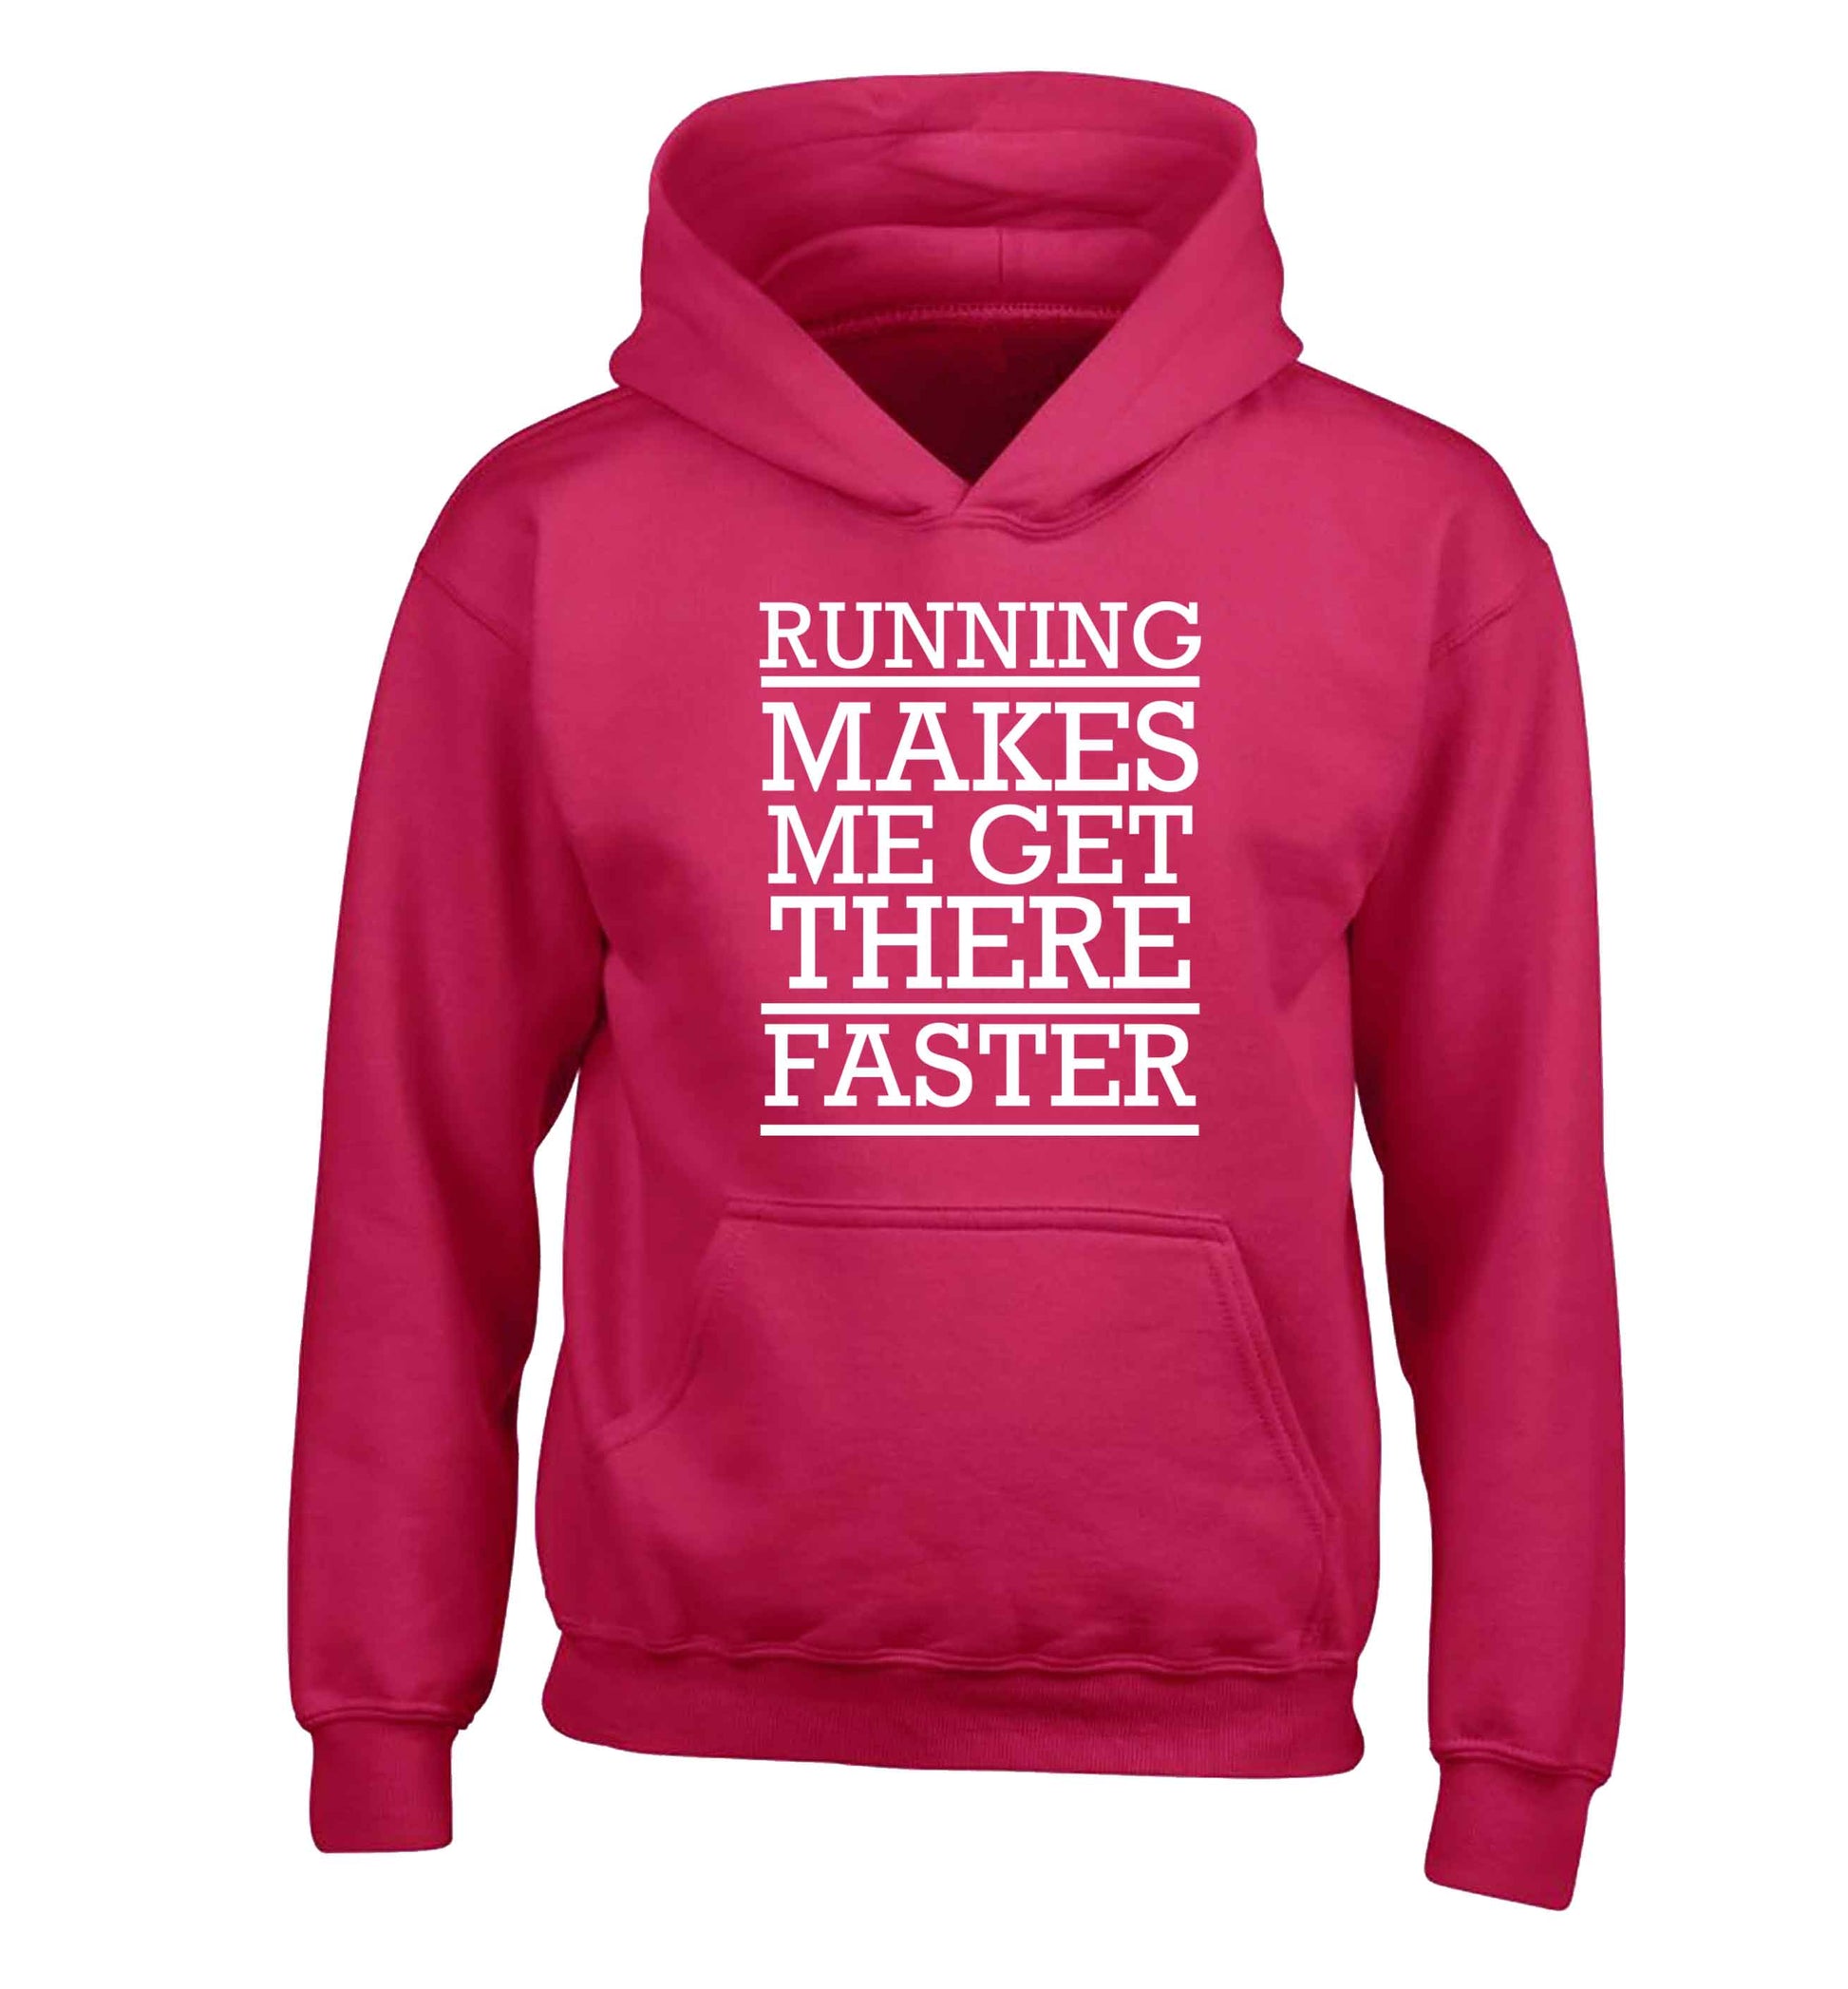 Running makes me get there faster children's pink hoodie 12-13 Years